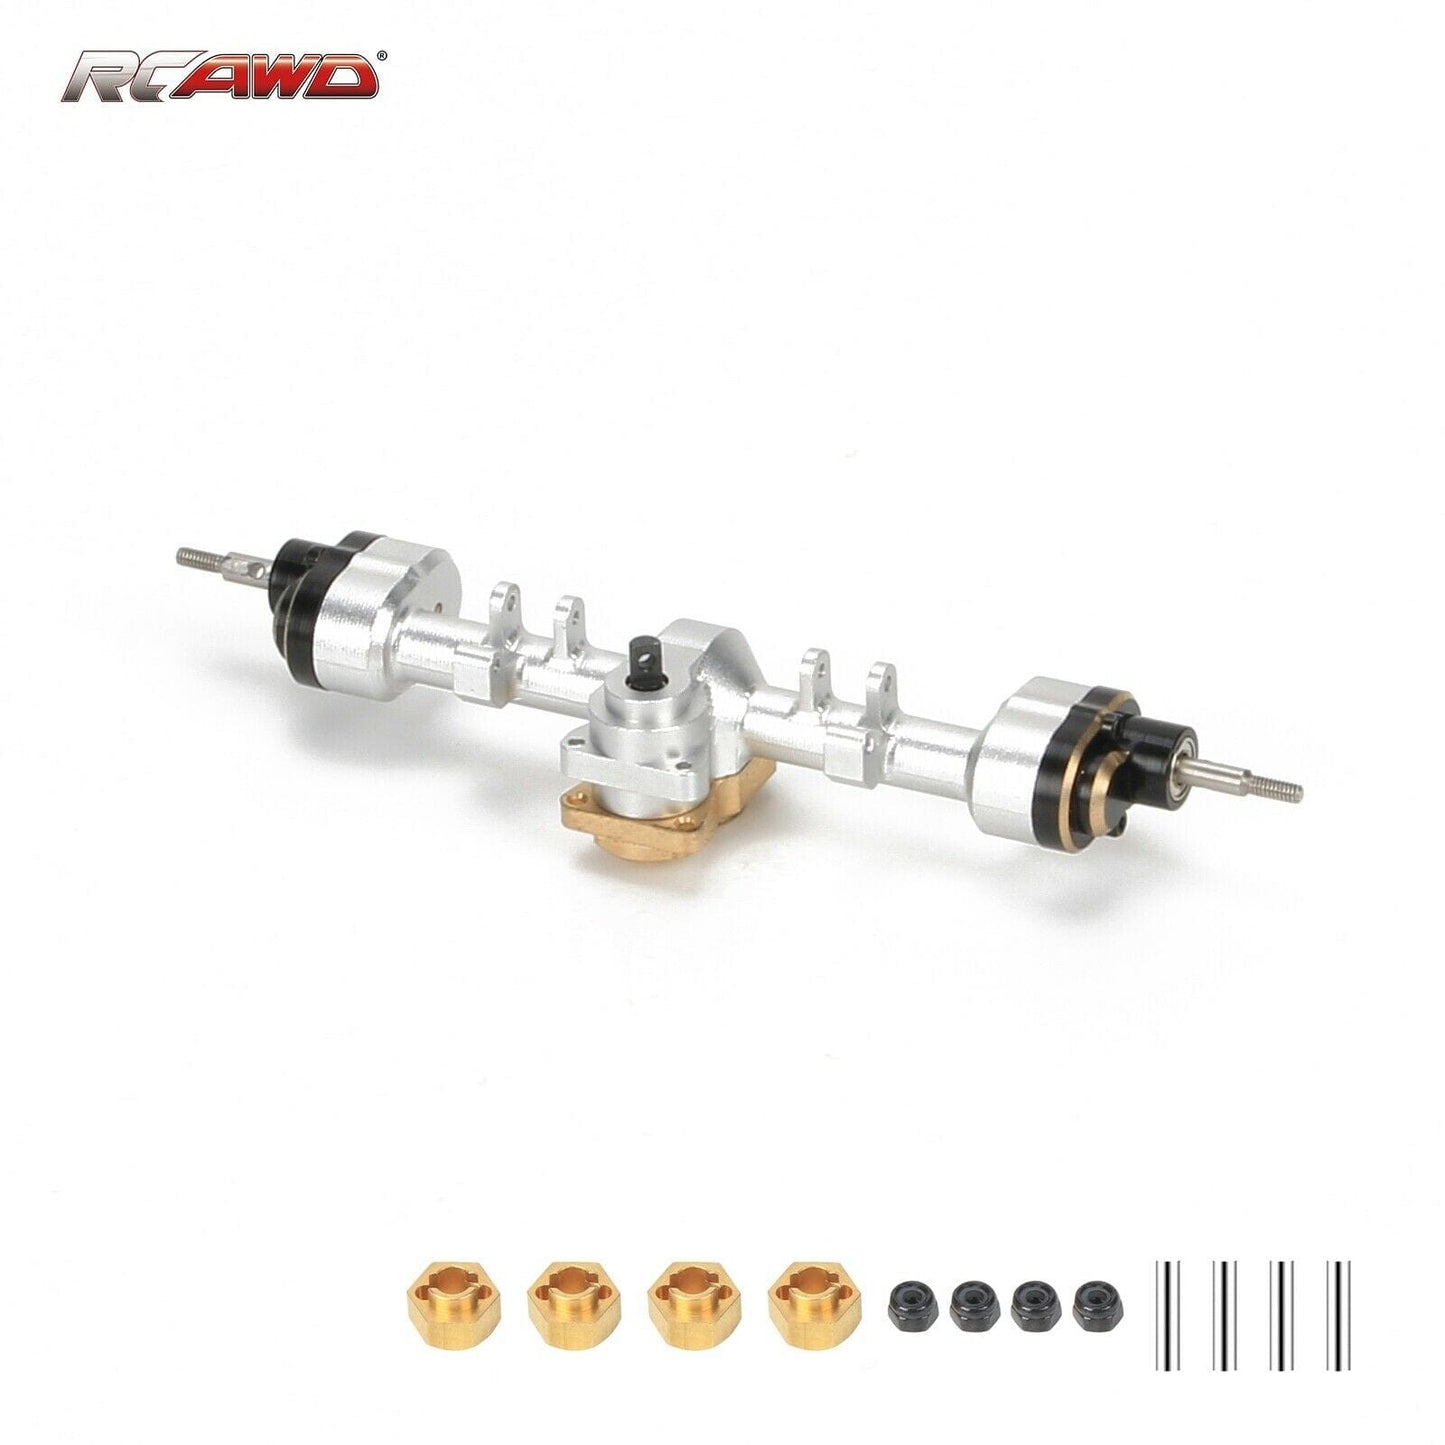 RCAWD RCAWD full metal rear portal axle for 1/24  Axial SCX24 crawlers